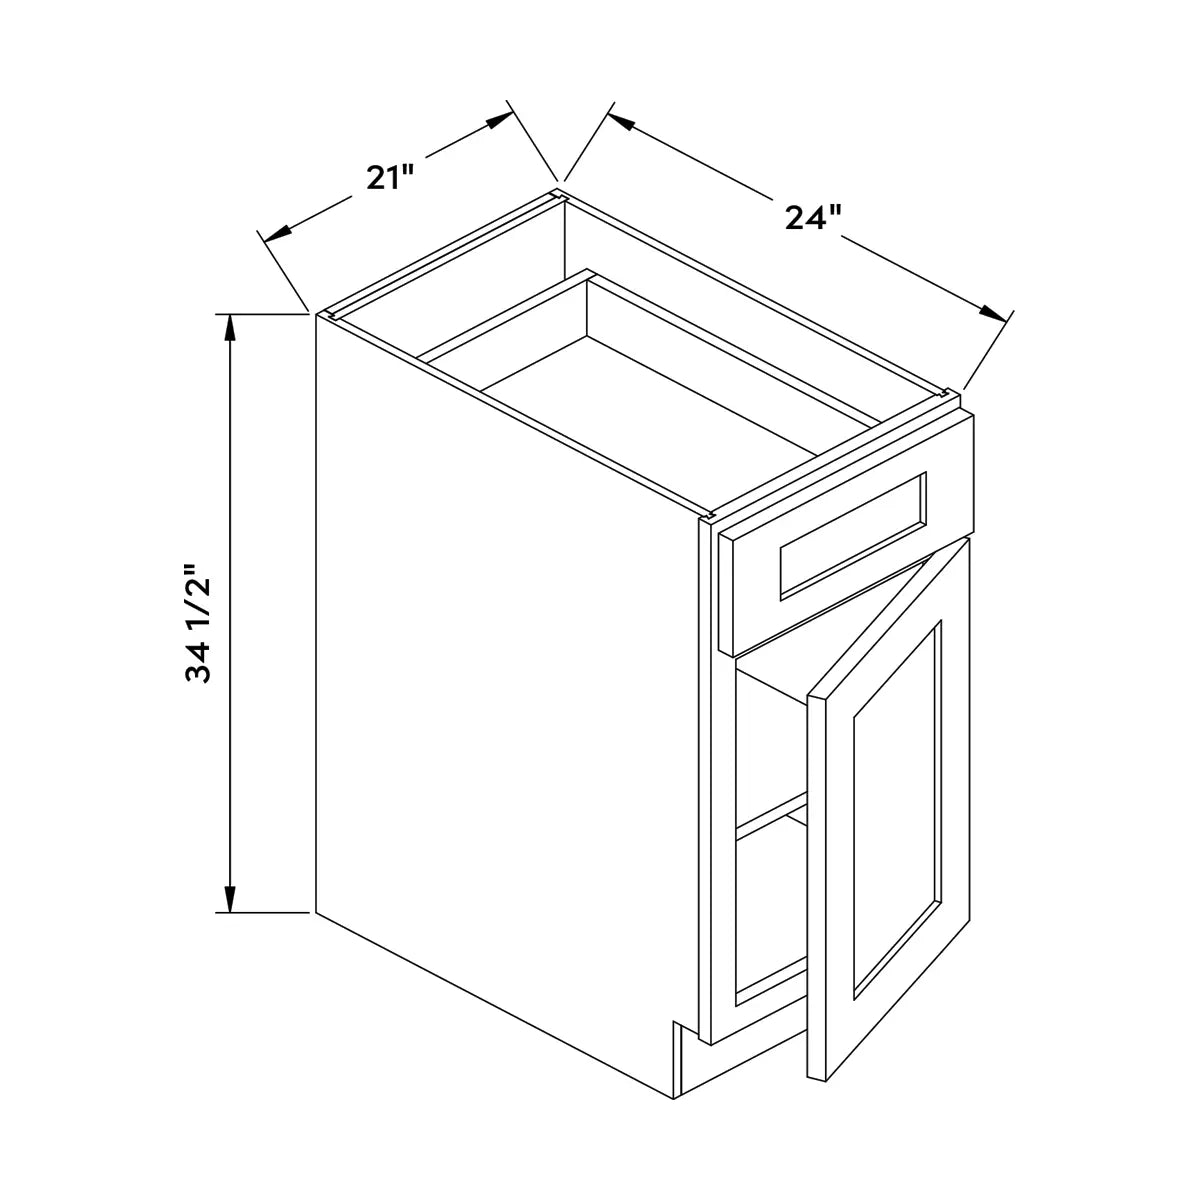 Craft Cabinetry Shaker Aqua 21”W Base Cabinet Image Specifications